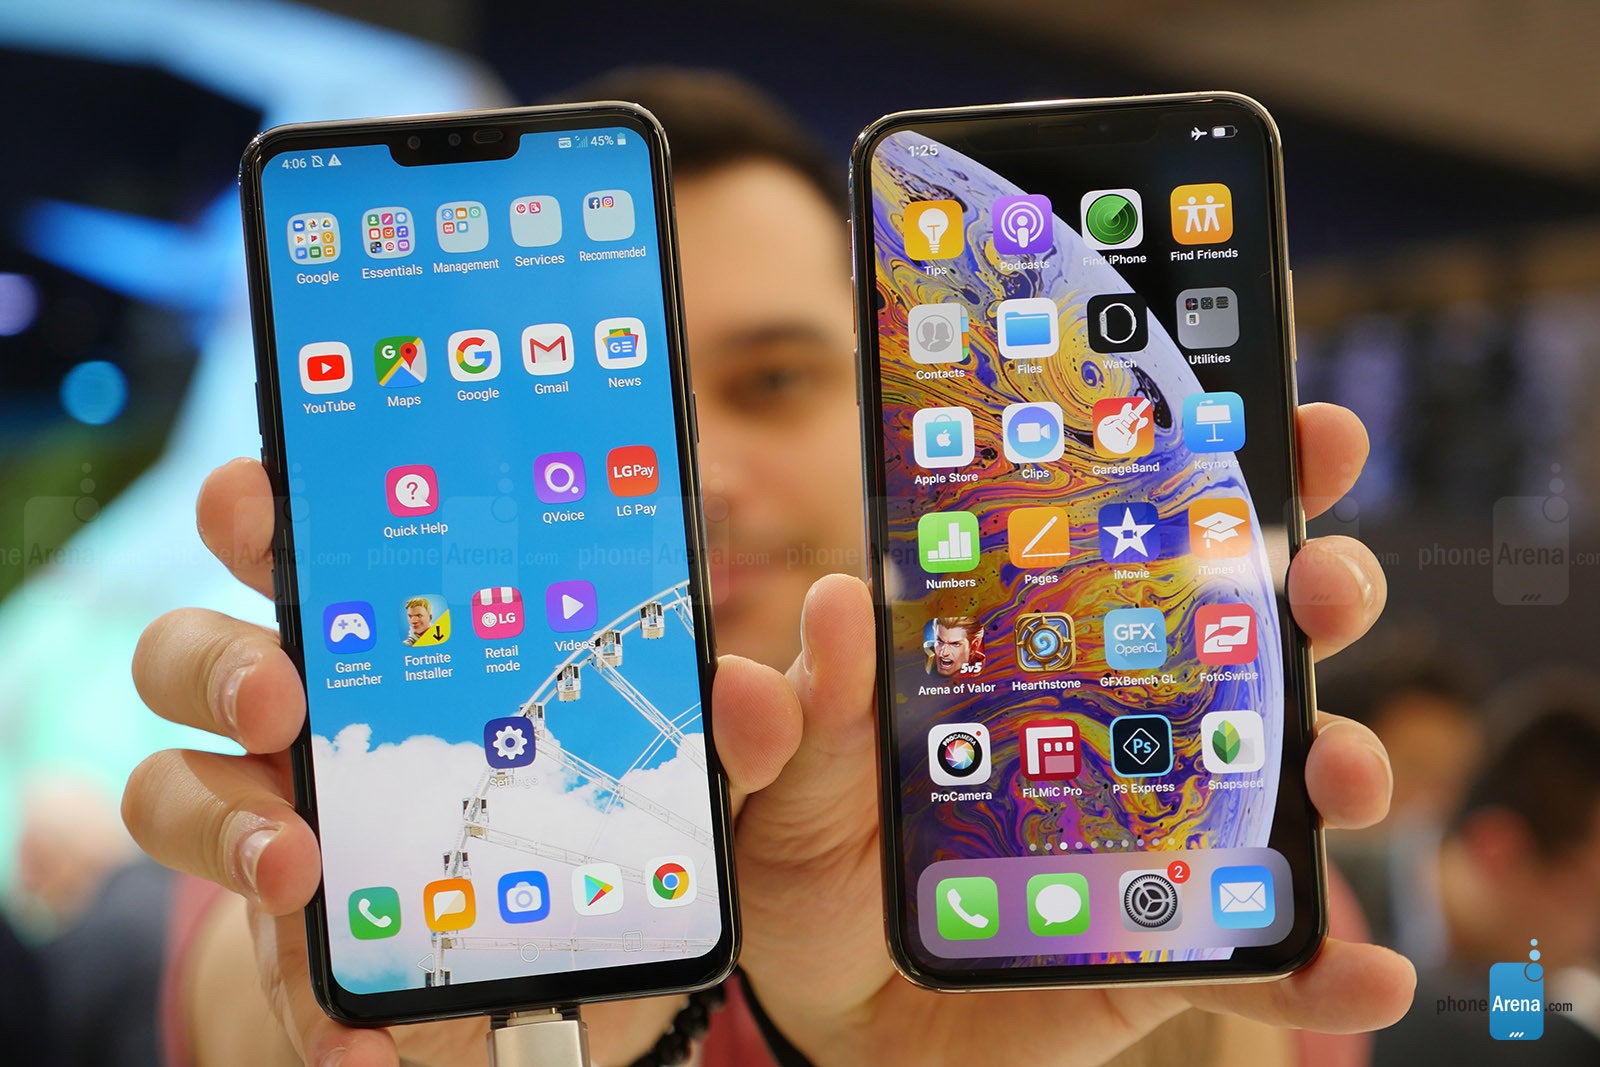 LG G8 and LG V50 versus the iPhone XS Max: first look!